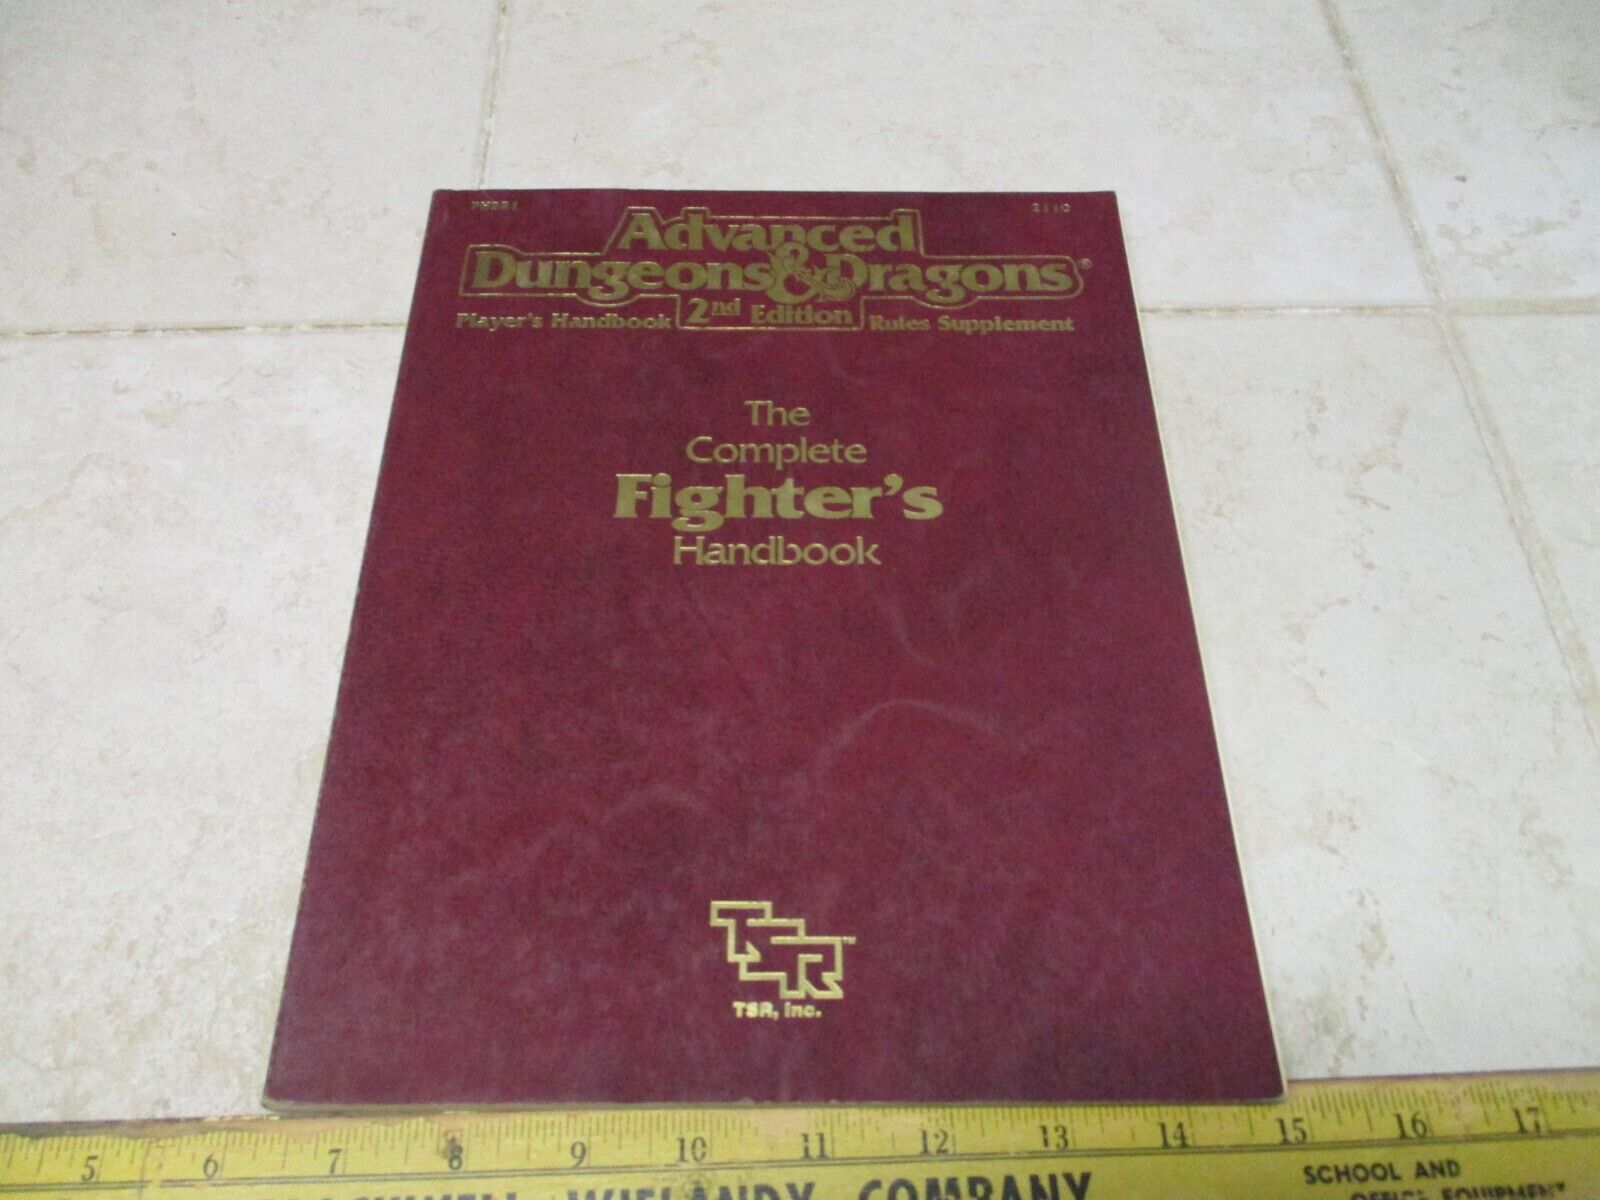 Advanced Dungeons & Dragons 2nd edition The Complete Wizard's 